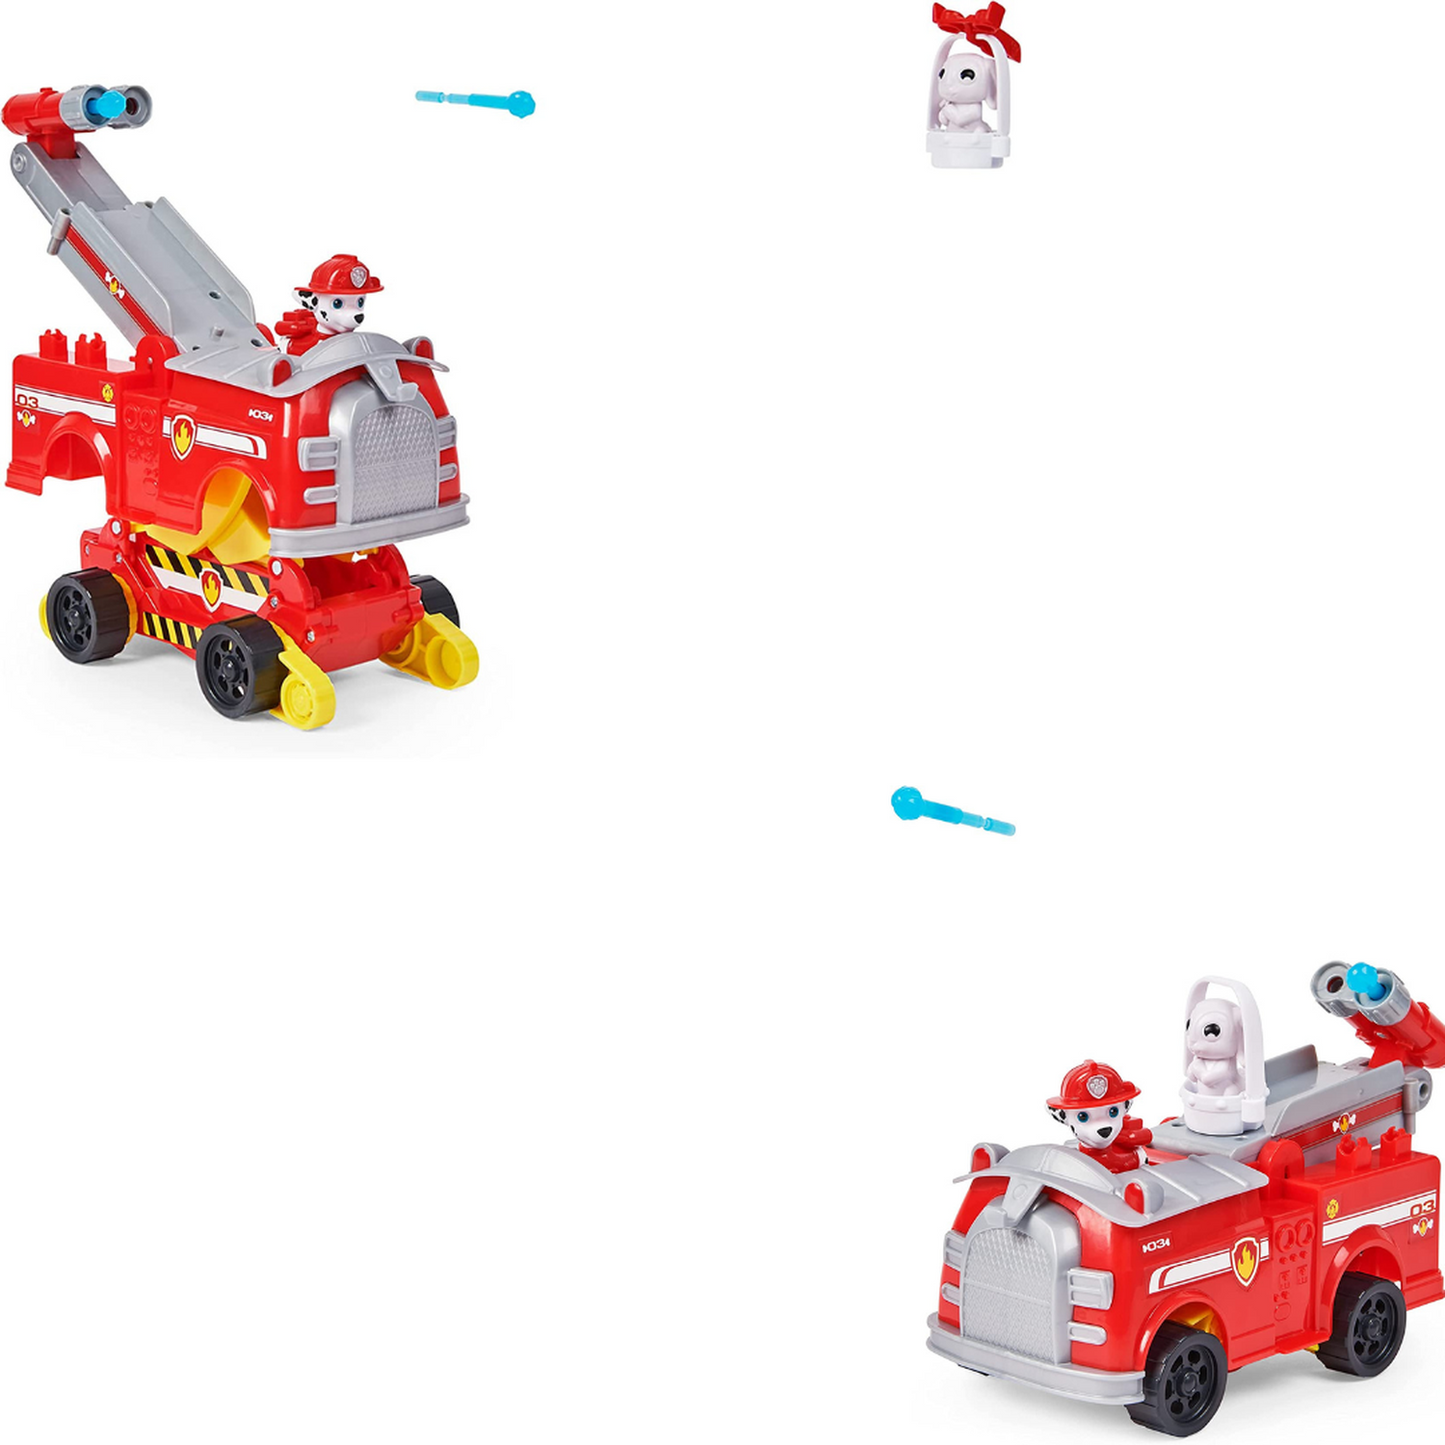 PAW Patrol: Rise and Rescue Transforming Car with Marshall